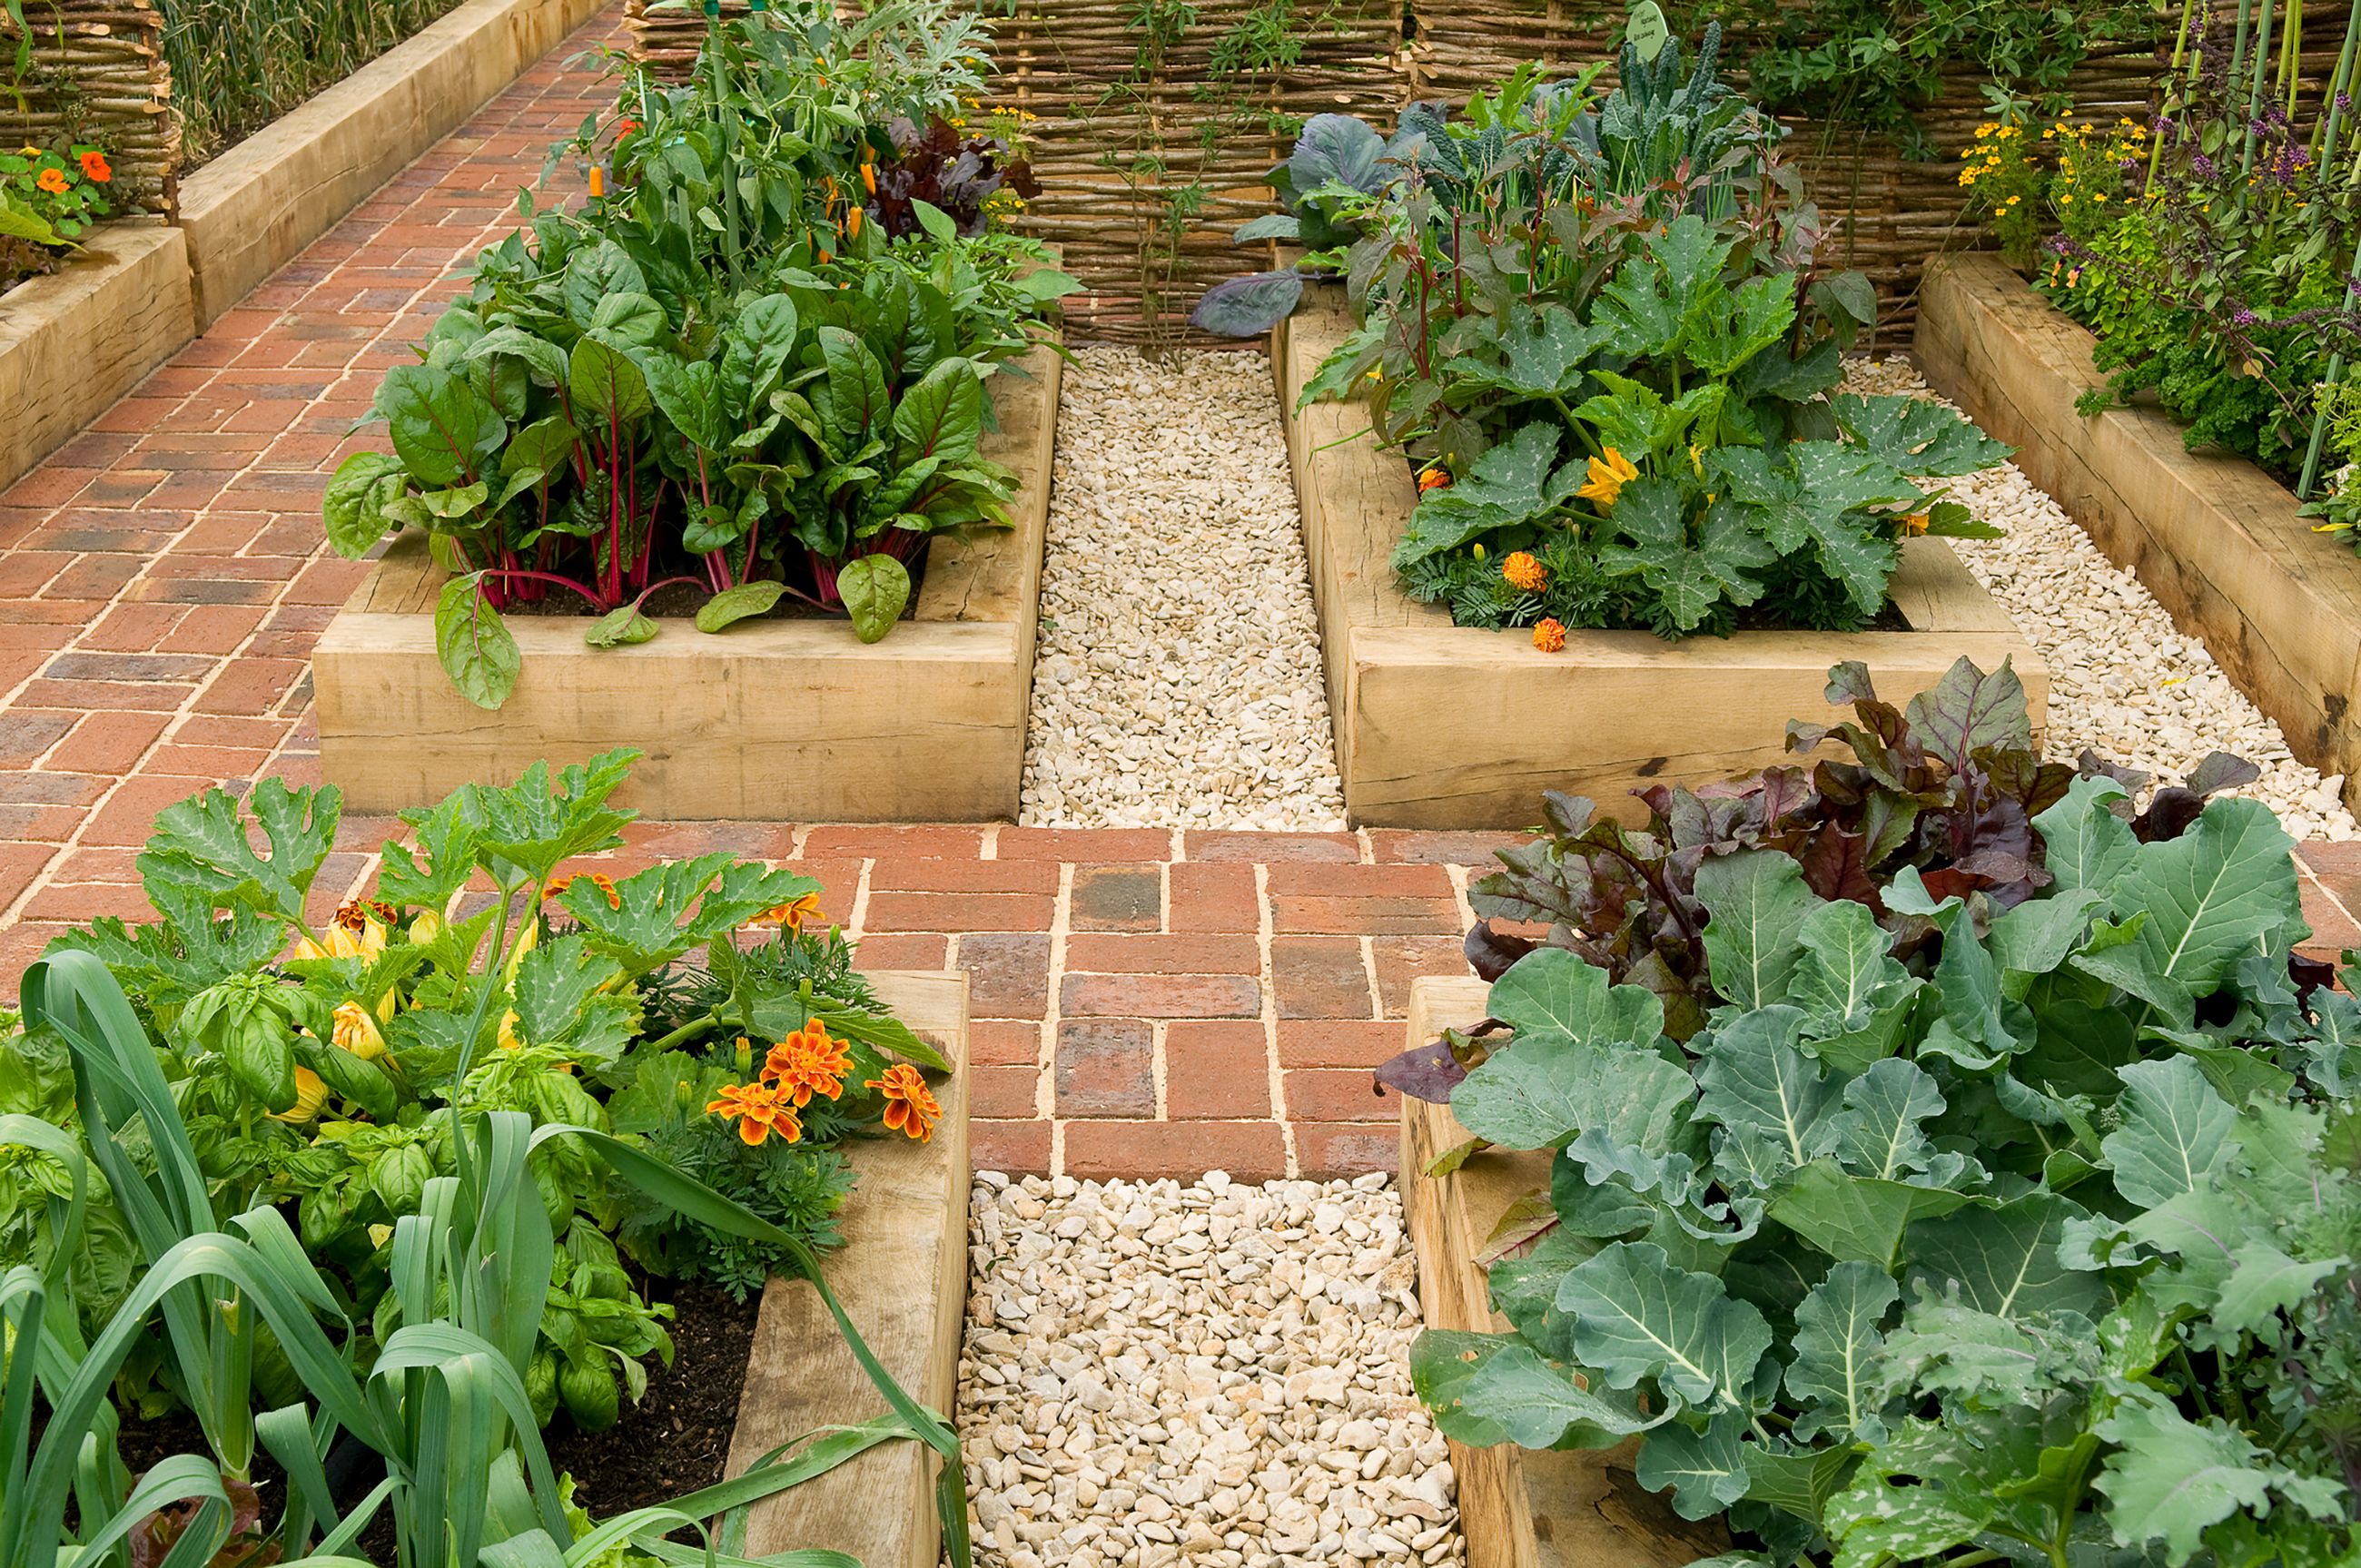 Selecting the Right Material for Your Raised Bed Garden